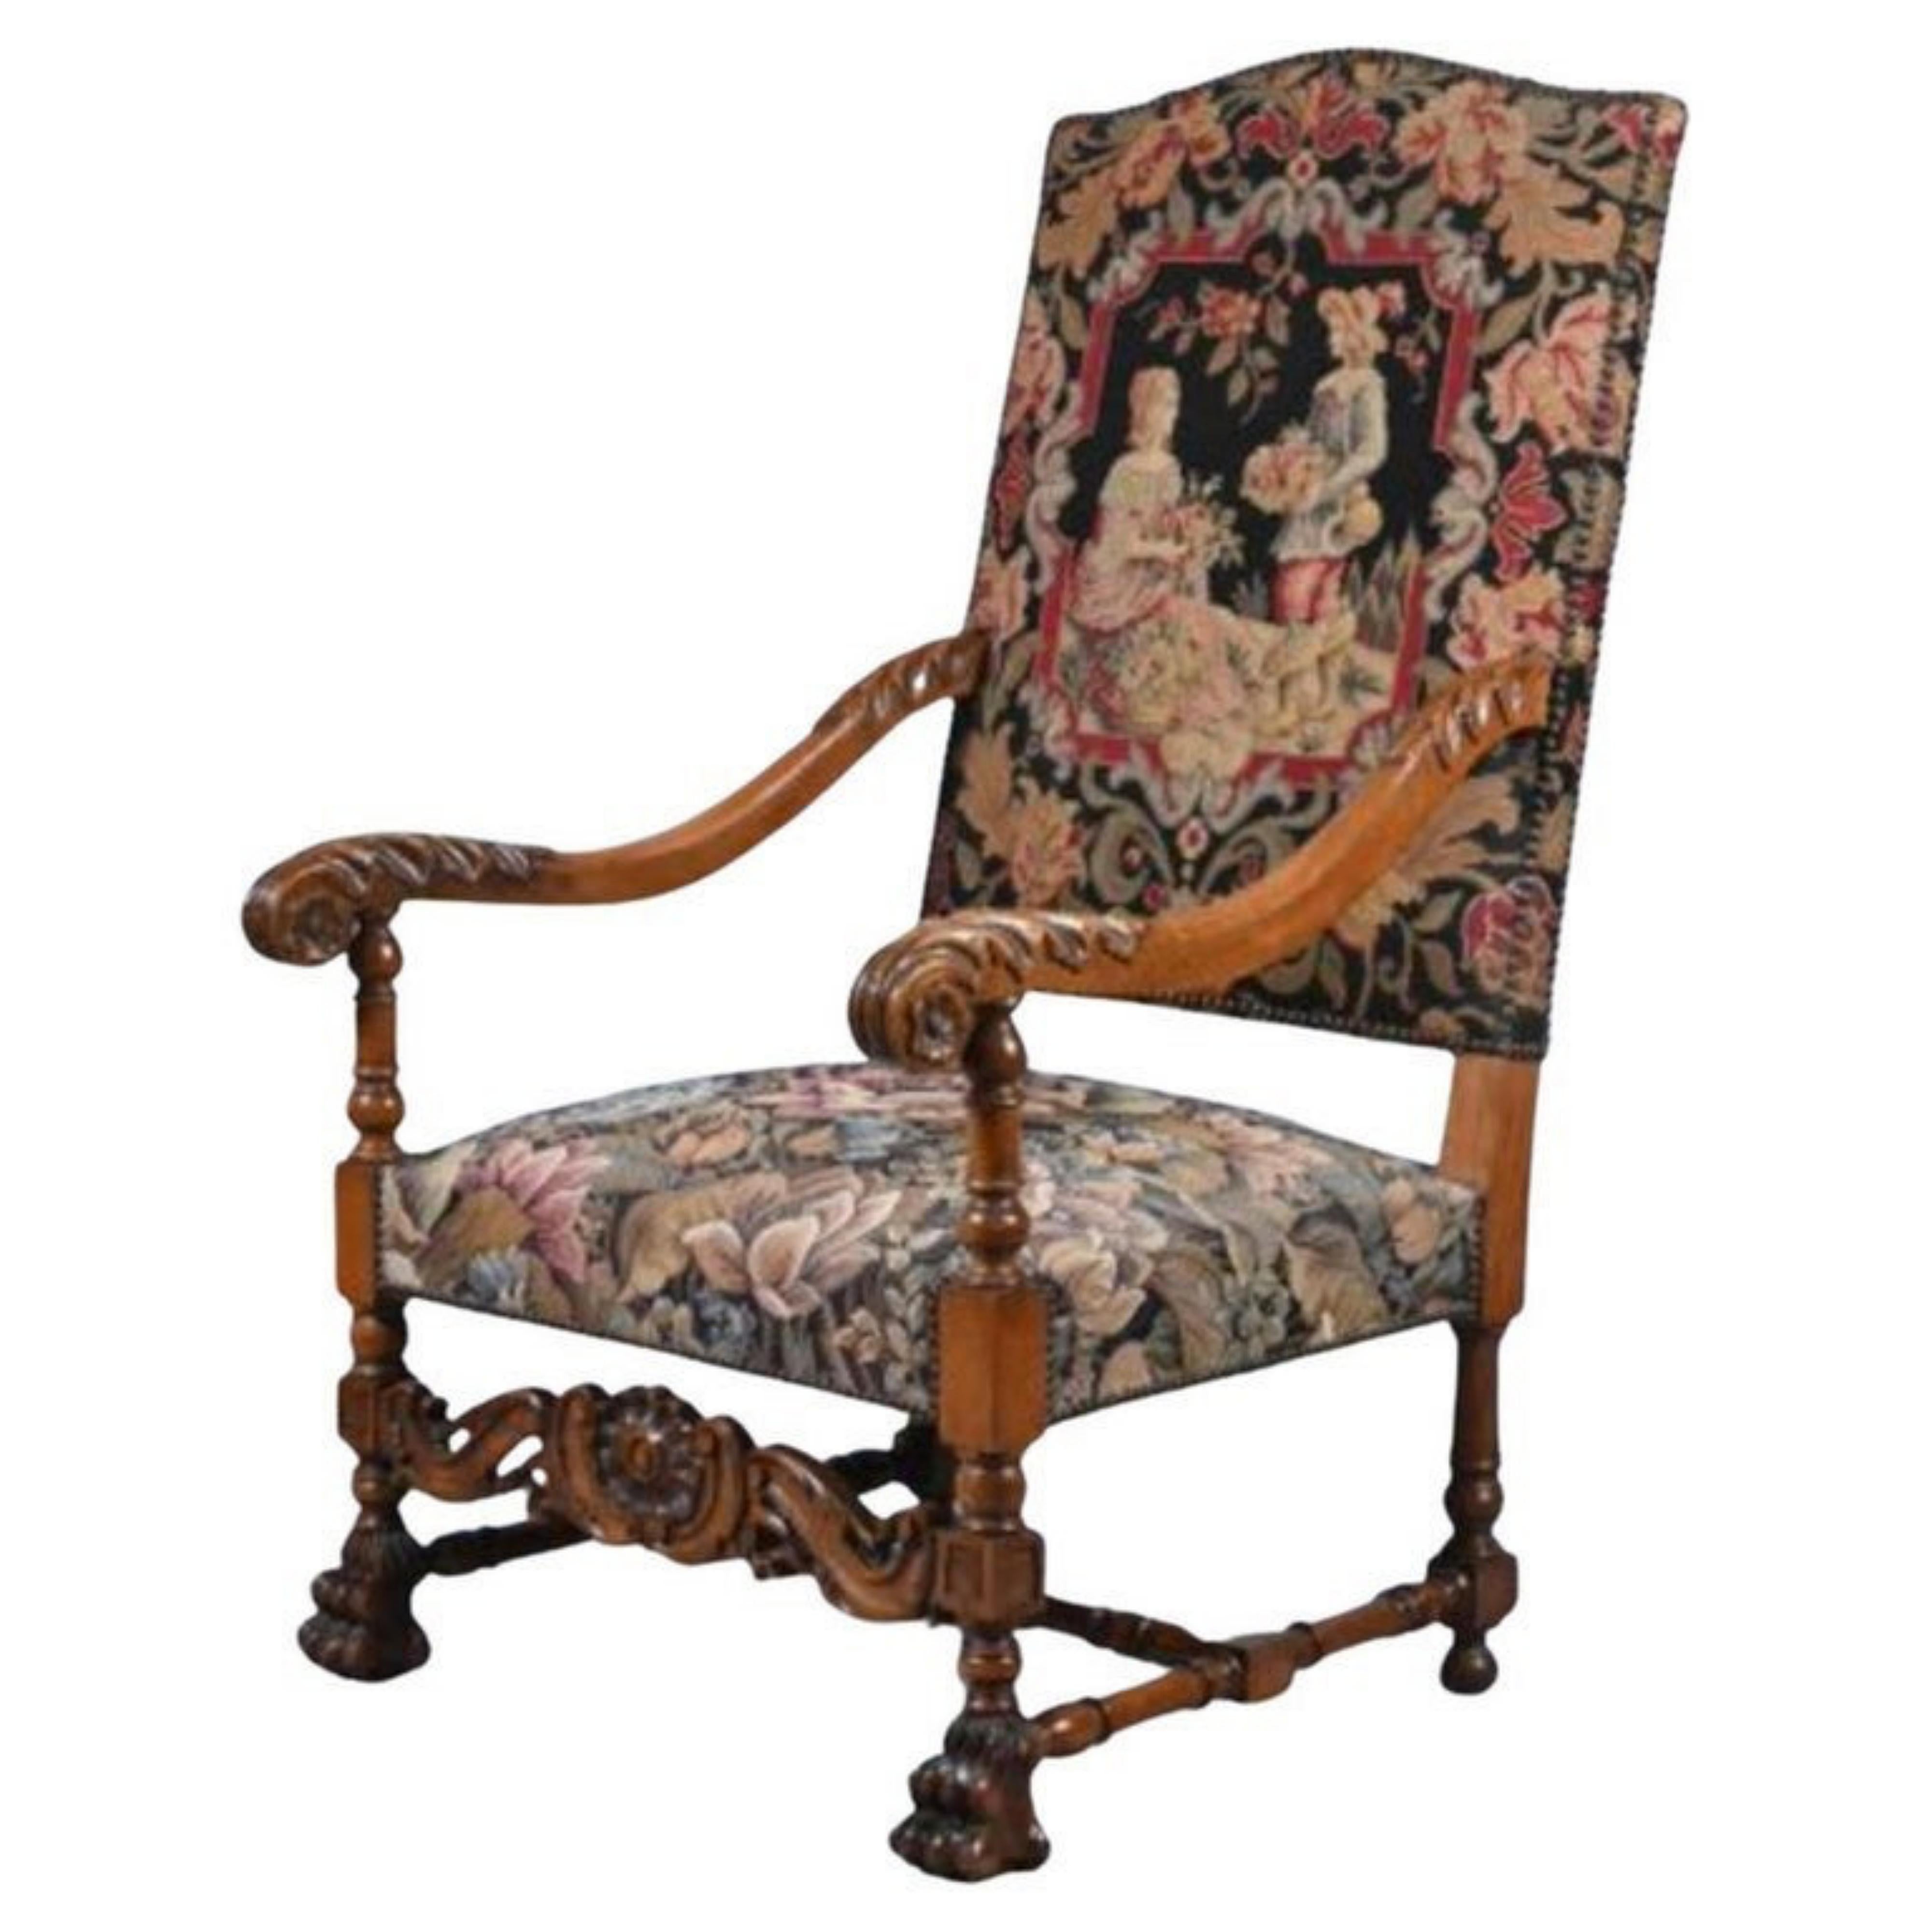 Rare Portuguese Chair 18th Century Rosewood with VIDEO In Good Condition For Sale In Madrid, ES